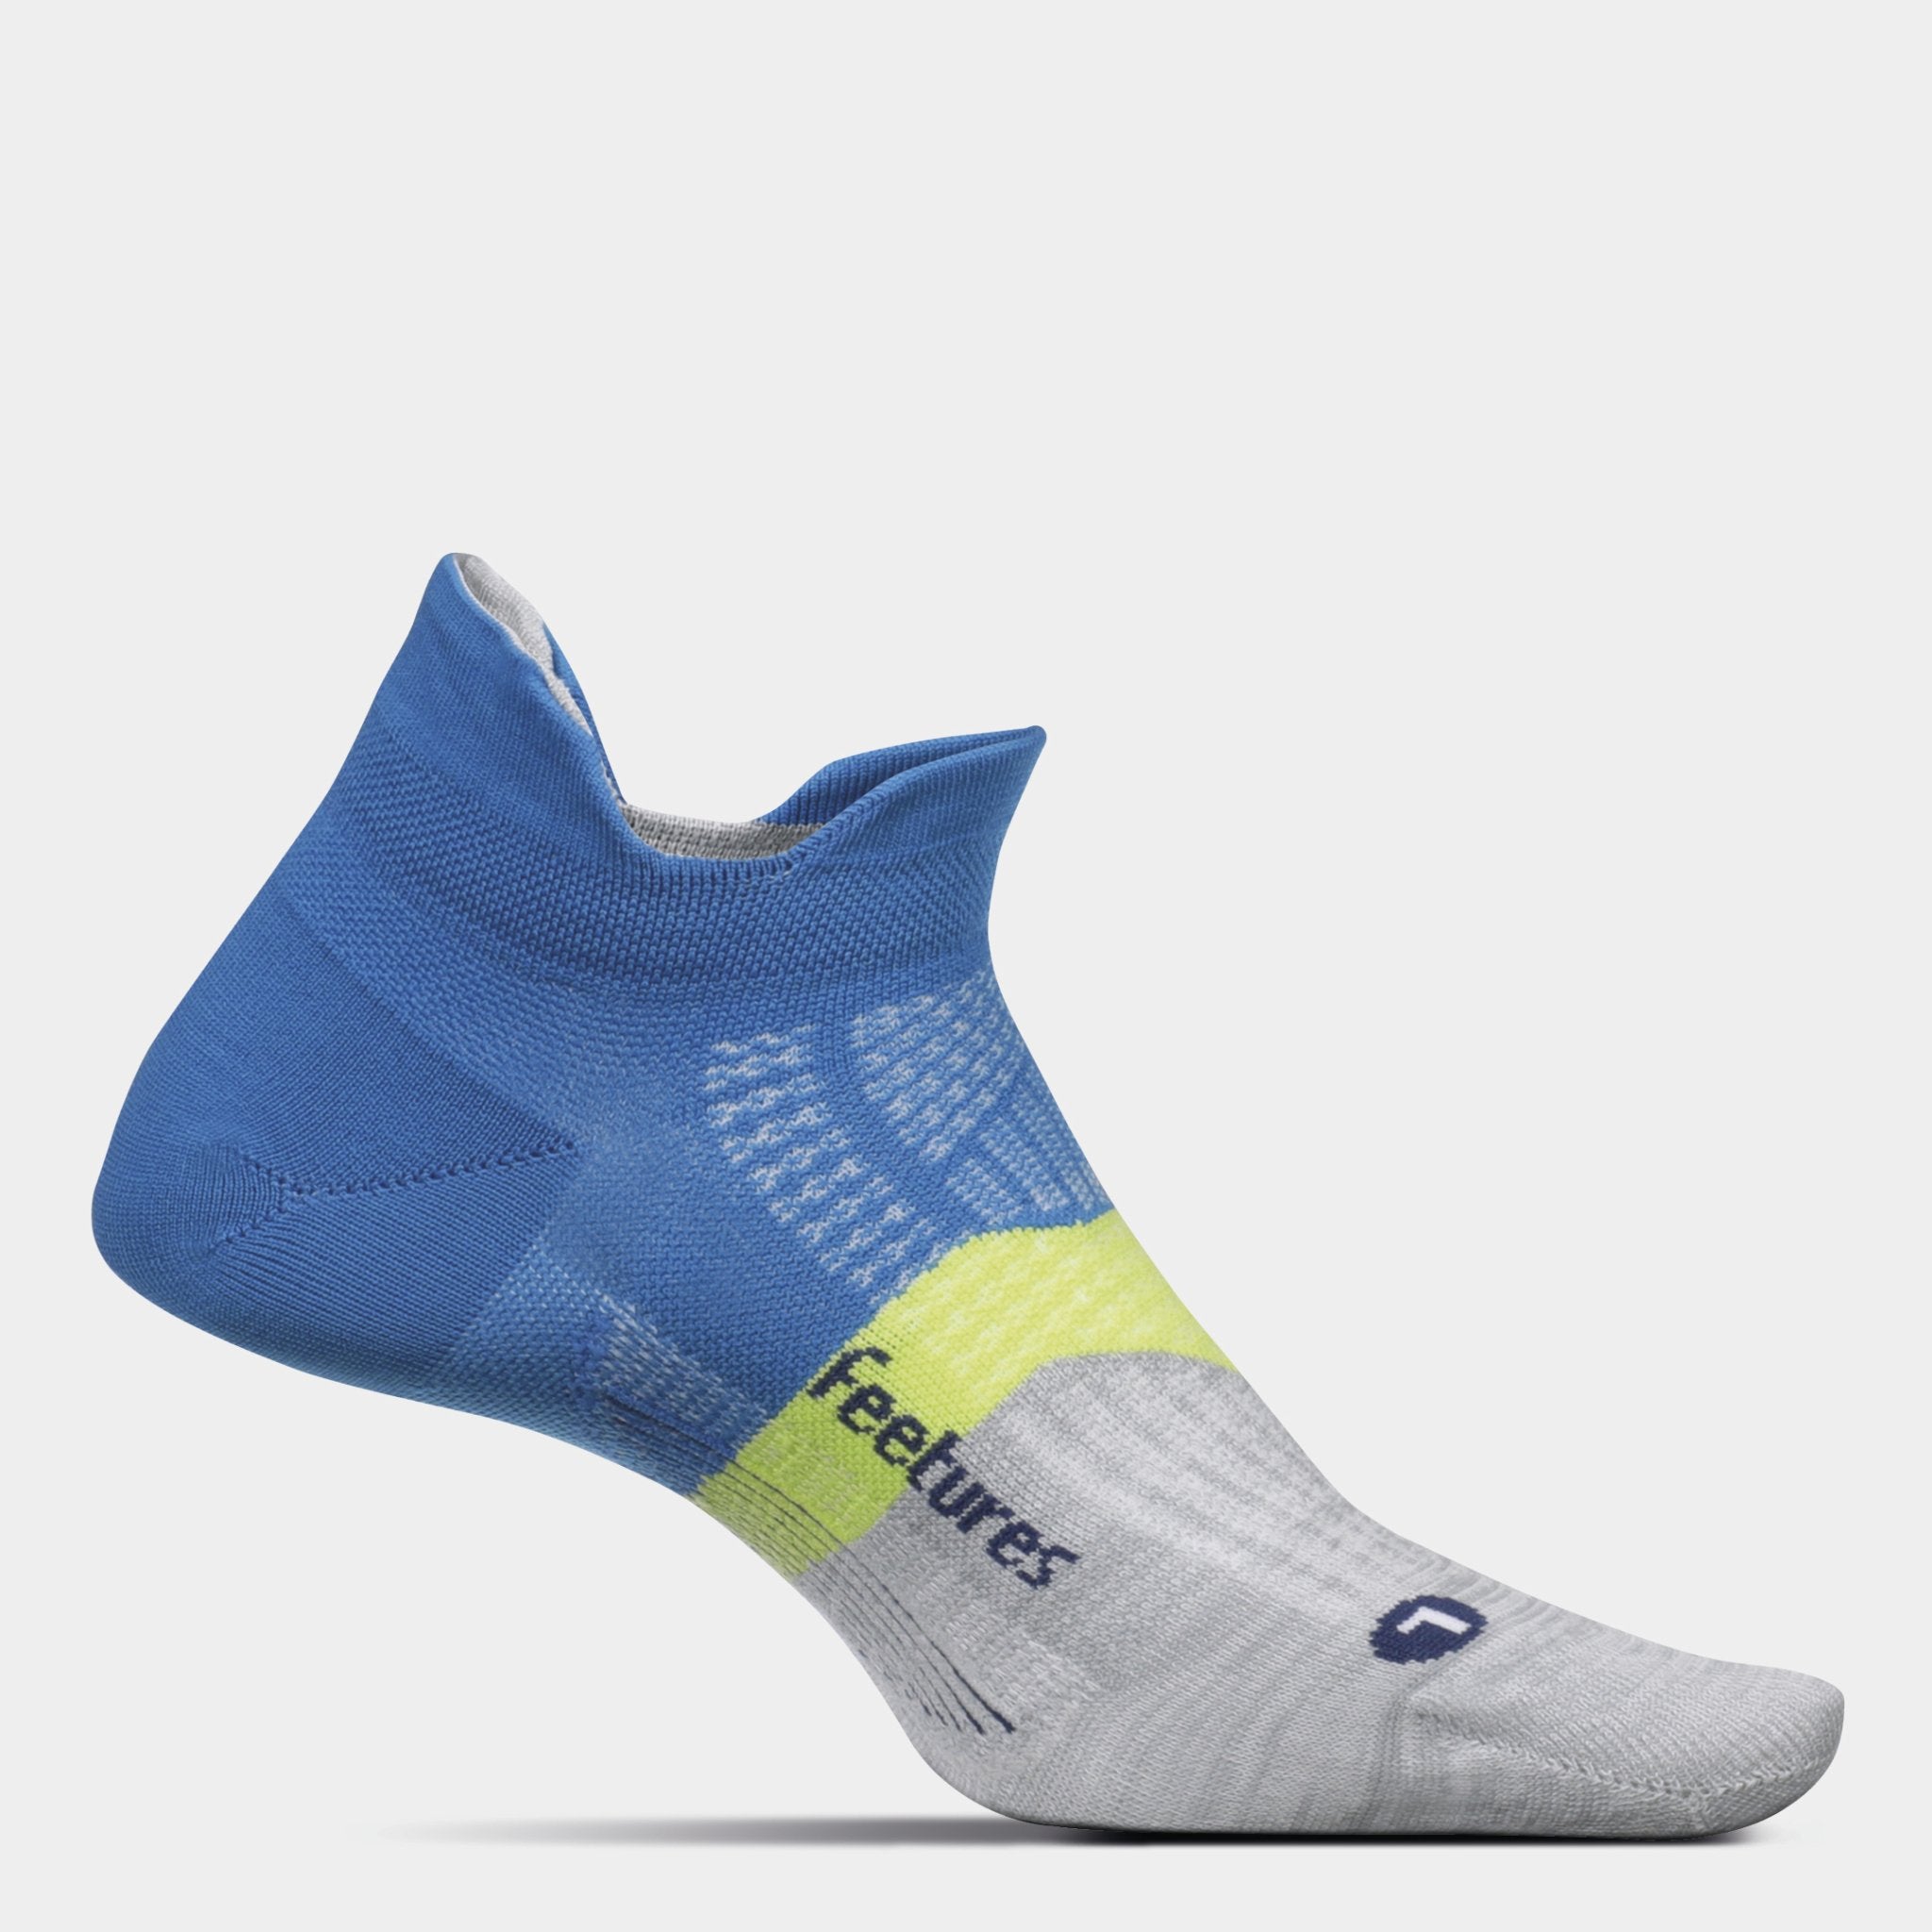 A medial view of the Feetures Elite Light Cushion running sock (left foot) in the color summer marine.